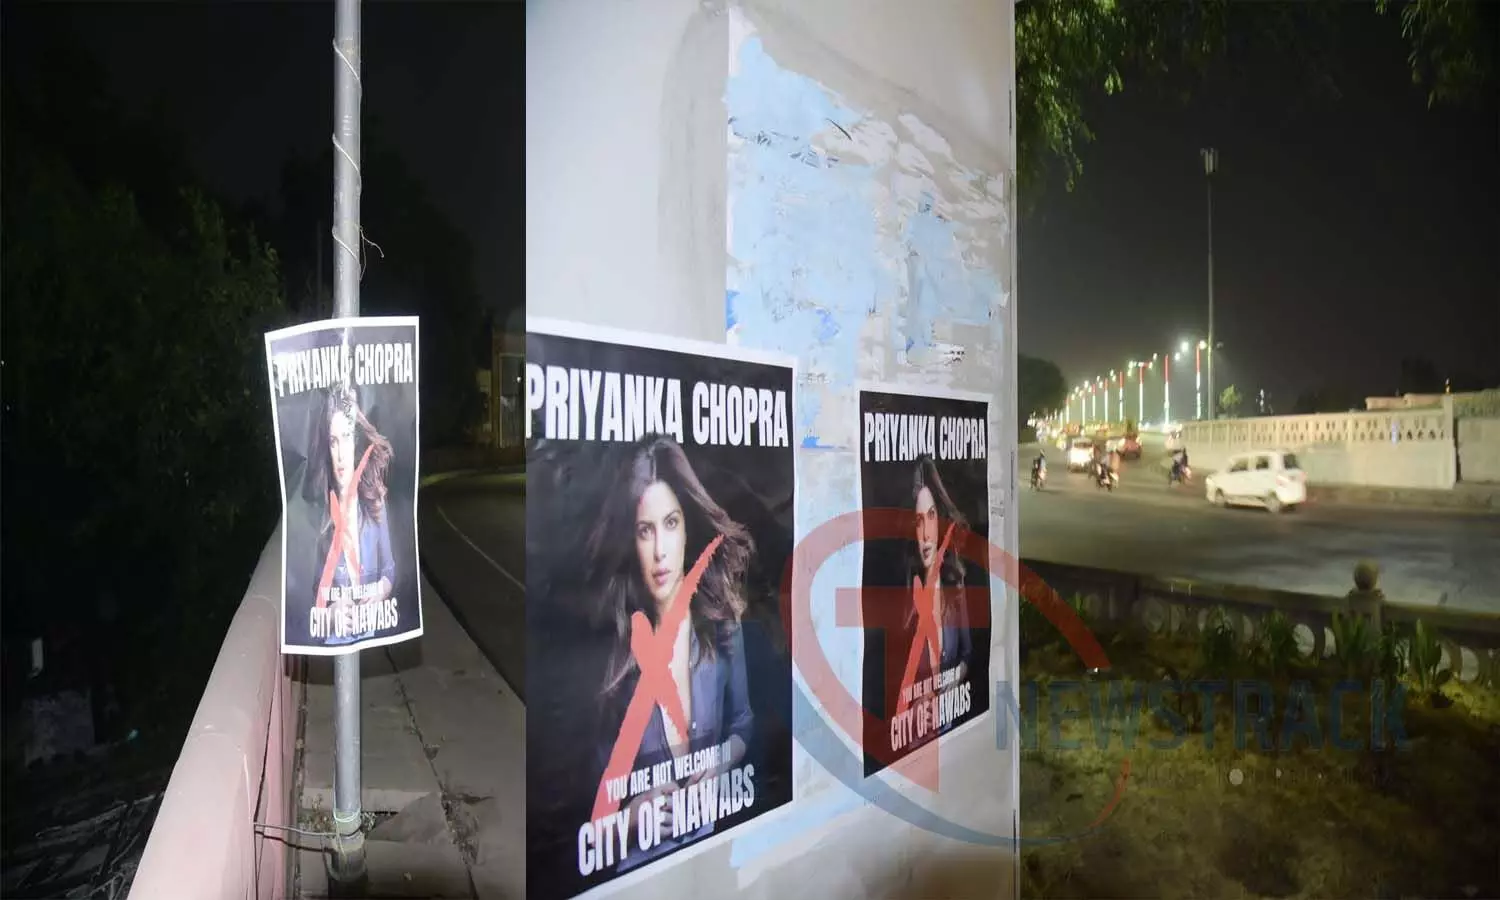 Protest against Priyanka Chopra in Lucknow to be held at GPO today